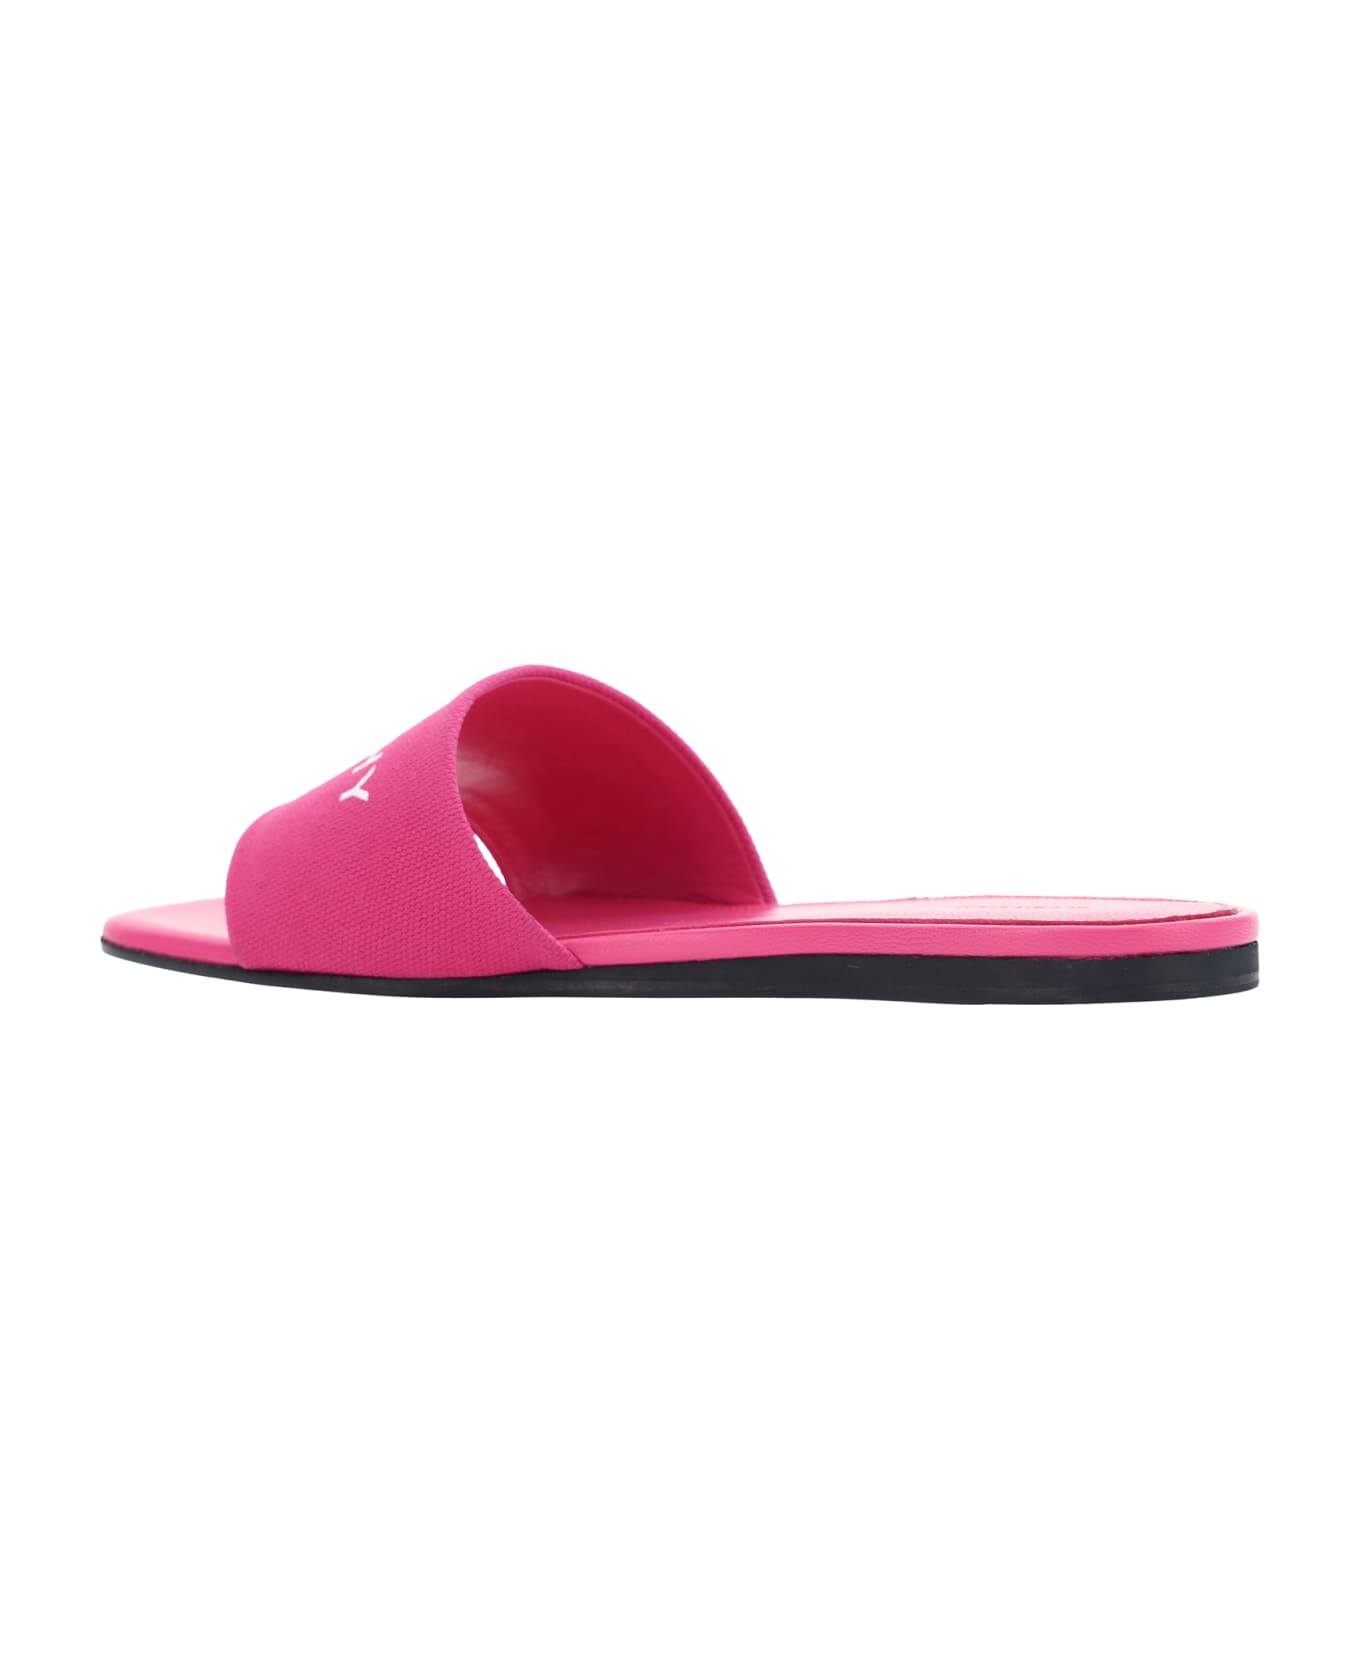 Givenchy 4g Flat Sandals - Neon Pink